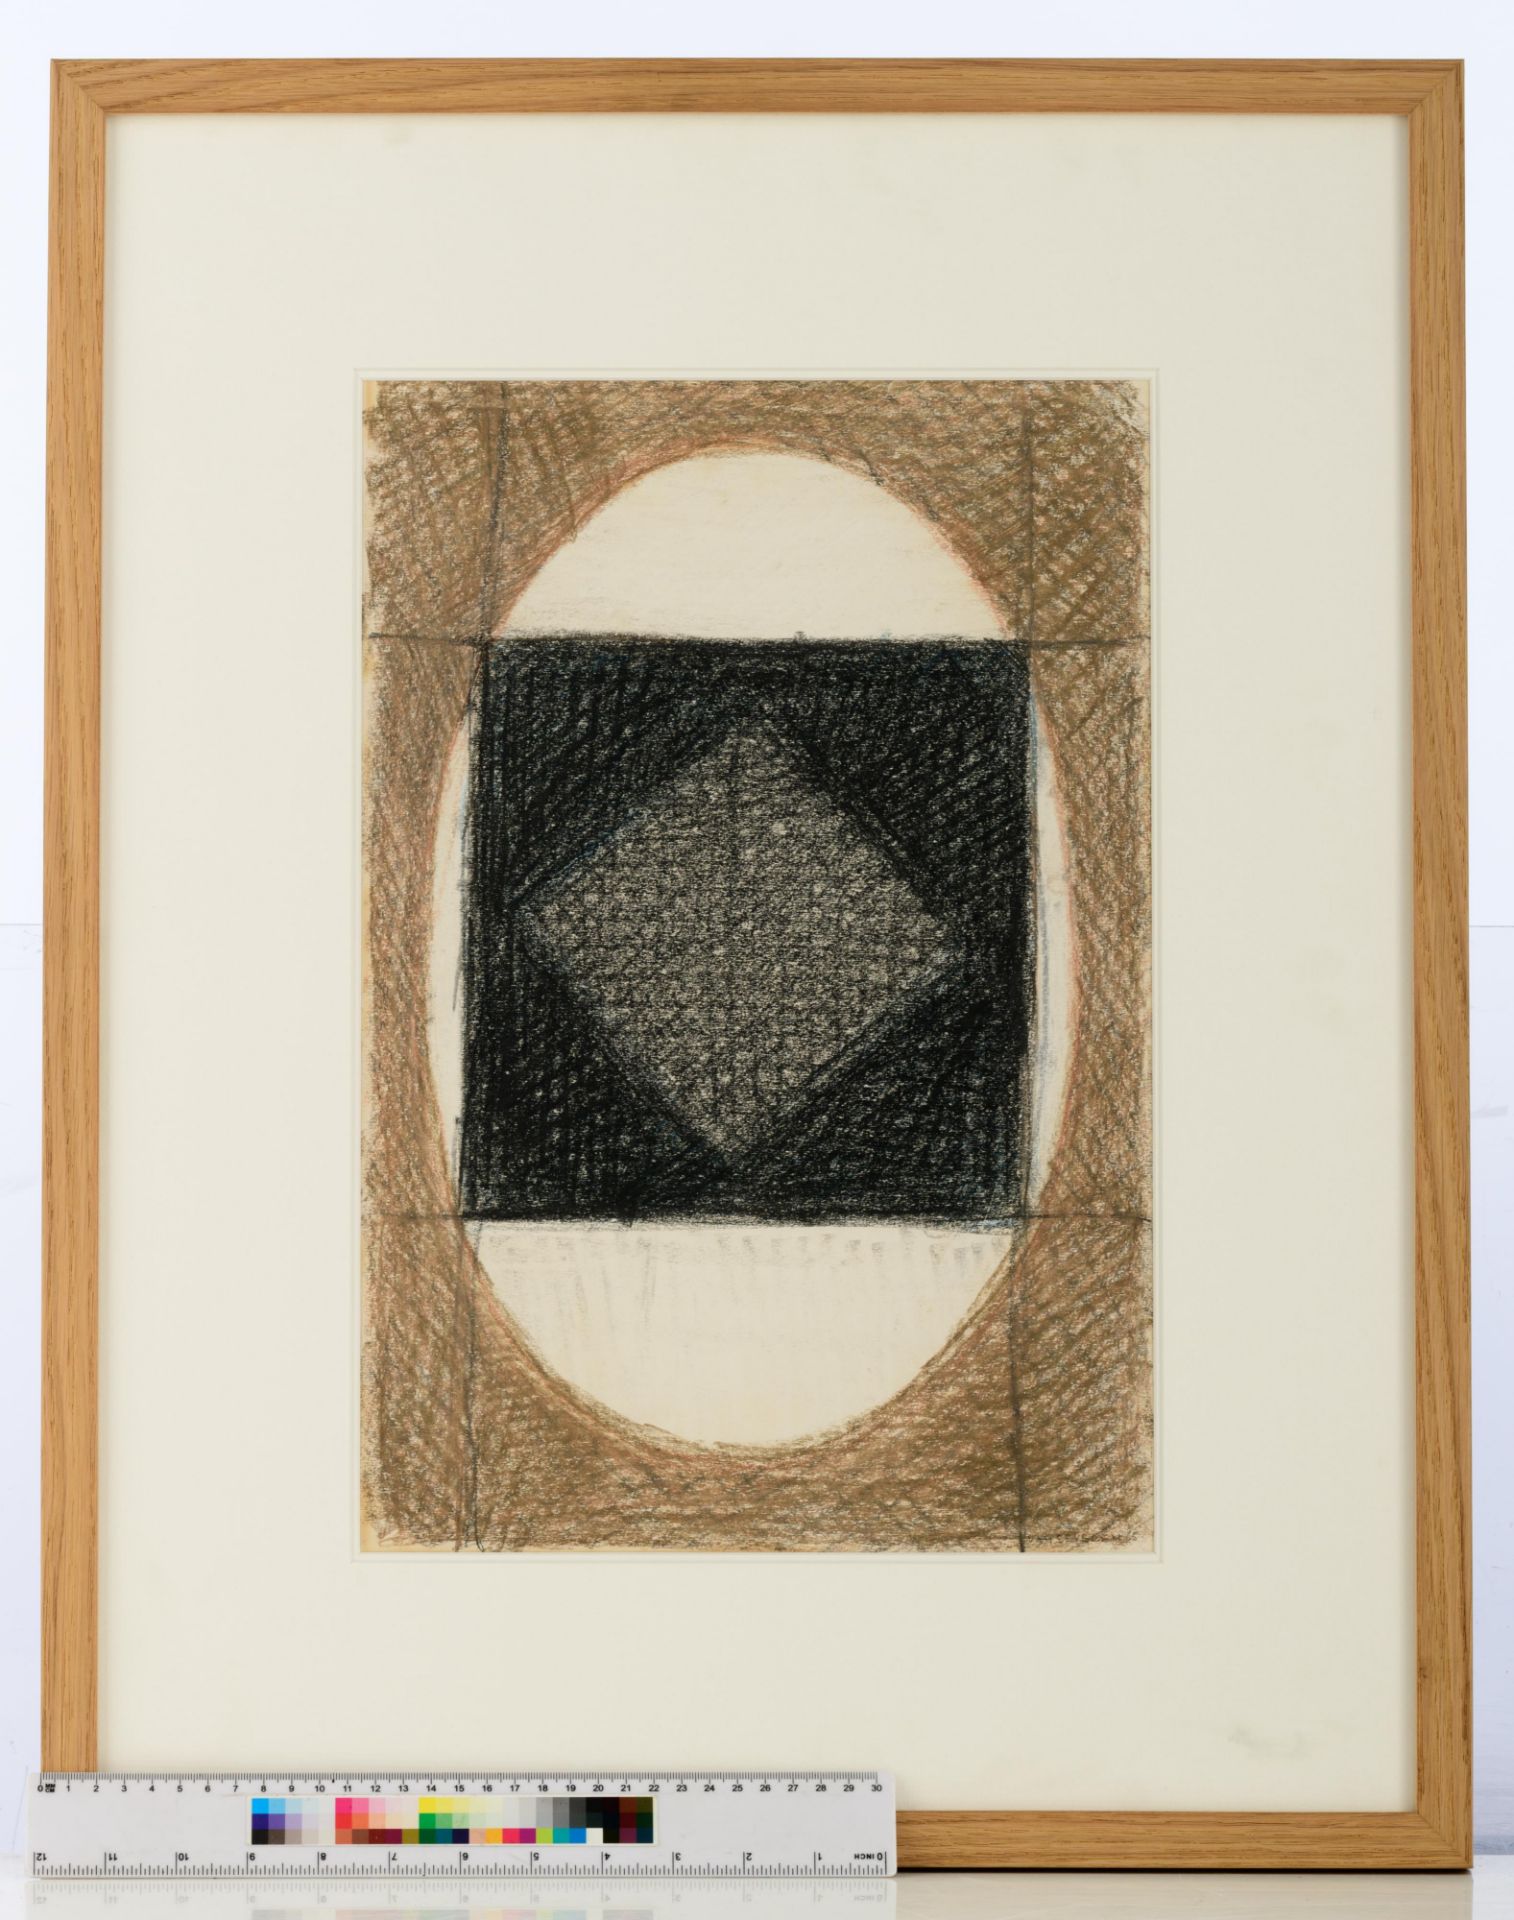 Van Severen D, an untitled geometric abstraction, charcoal and crayon on paper, 29 x 43 cm, Is possi - Image 5 of 5